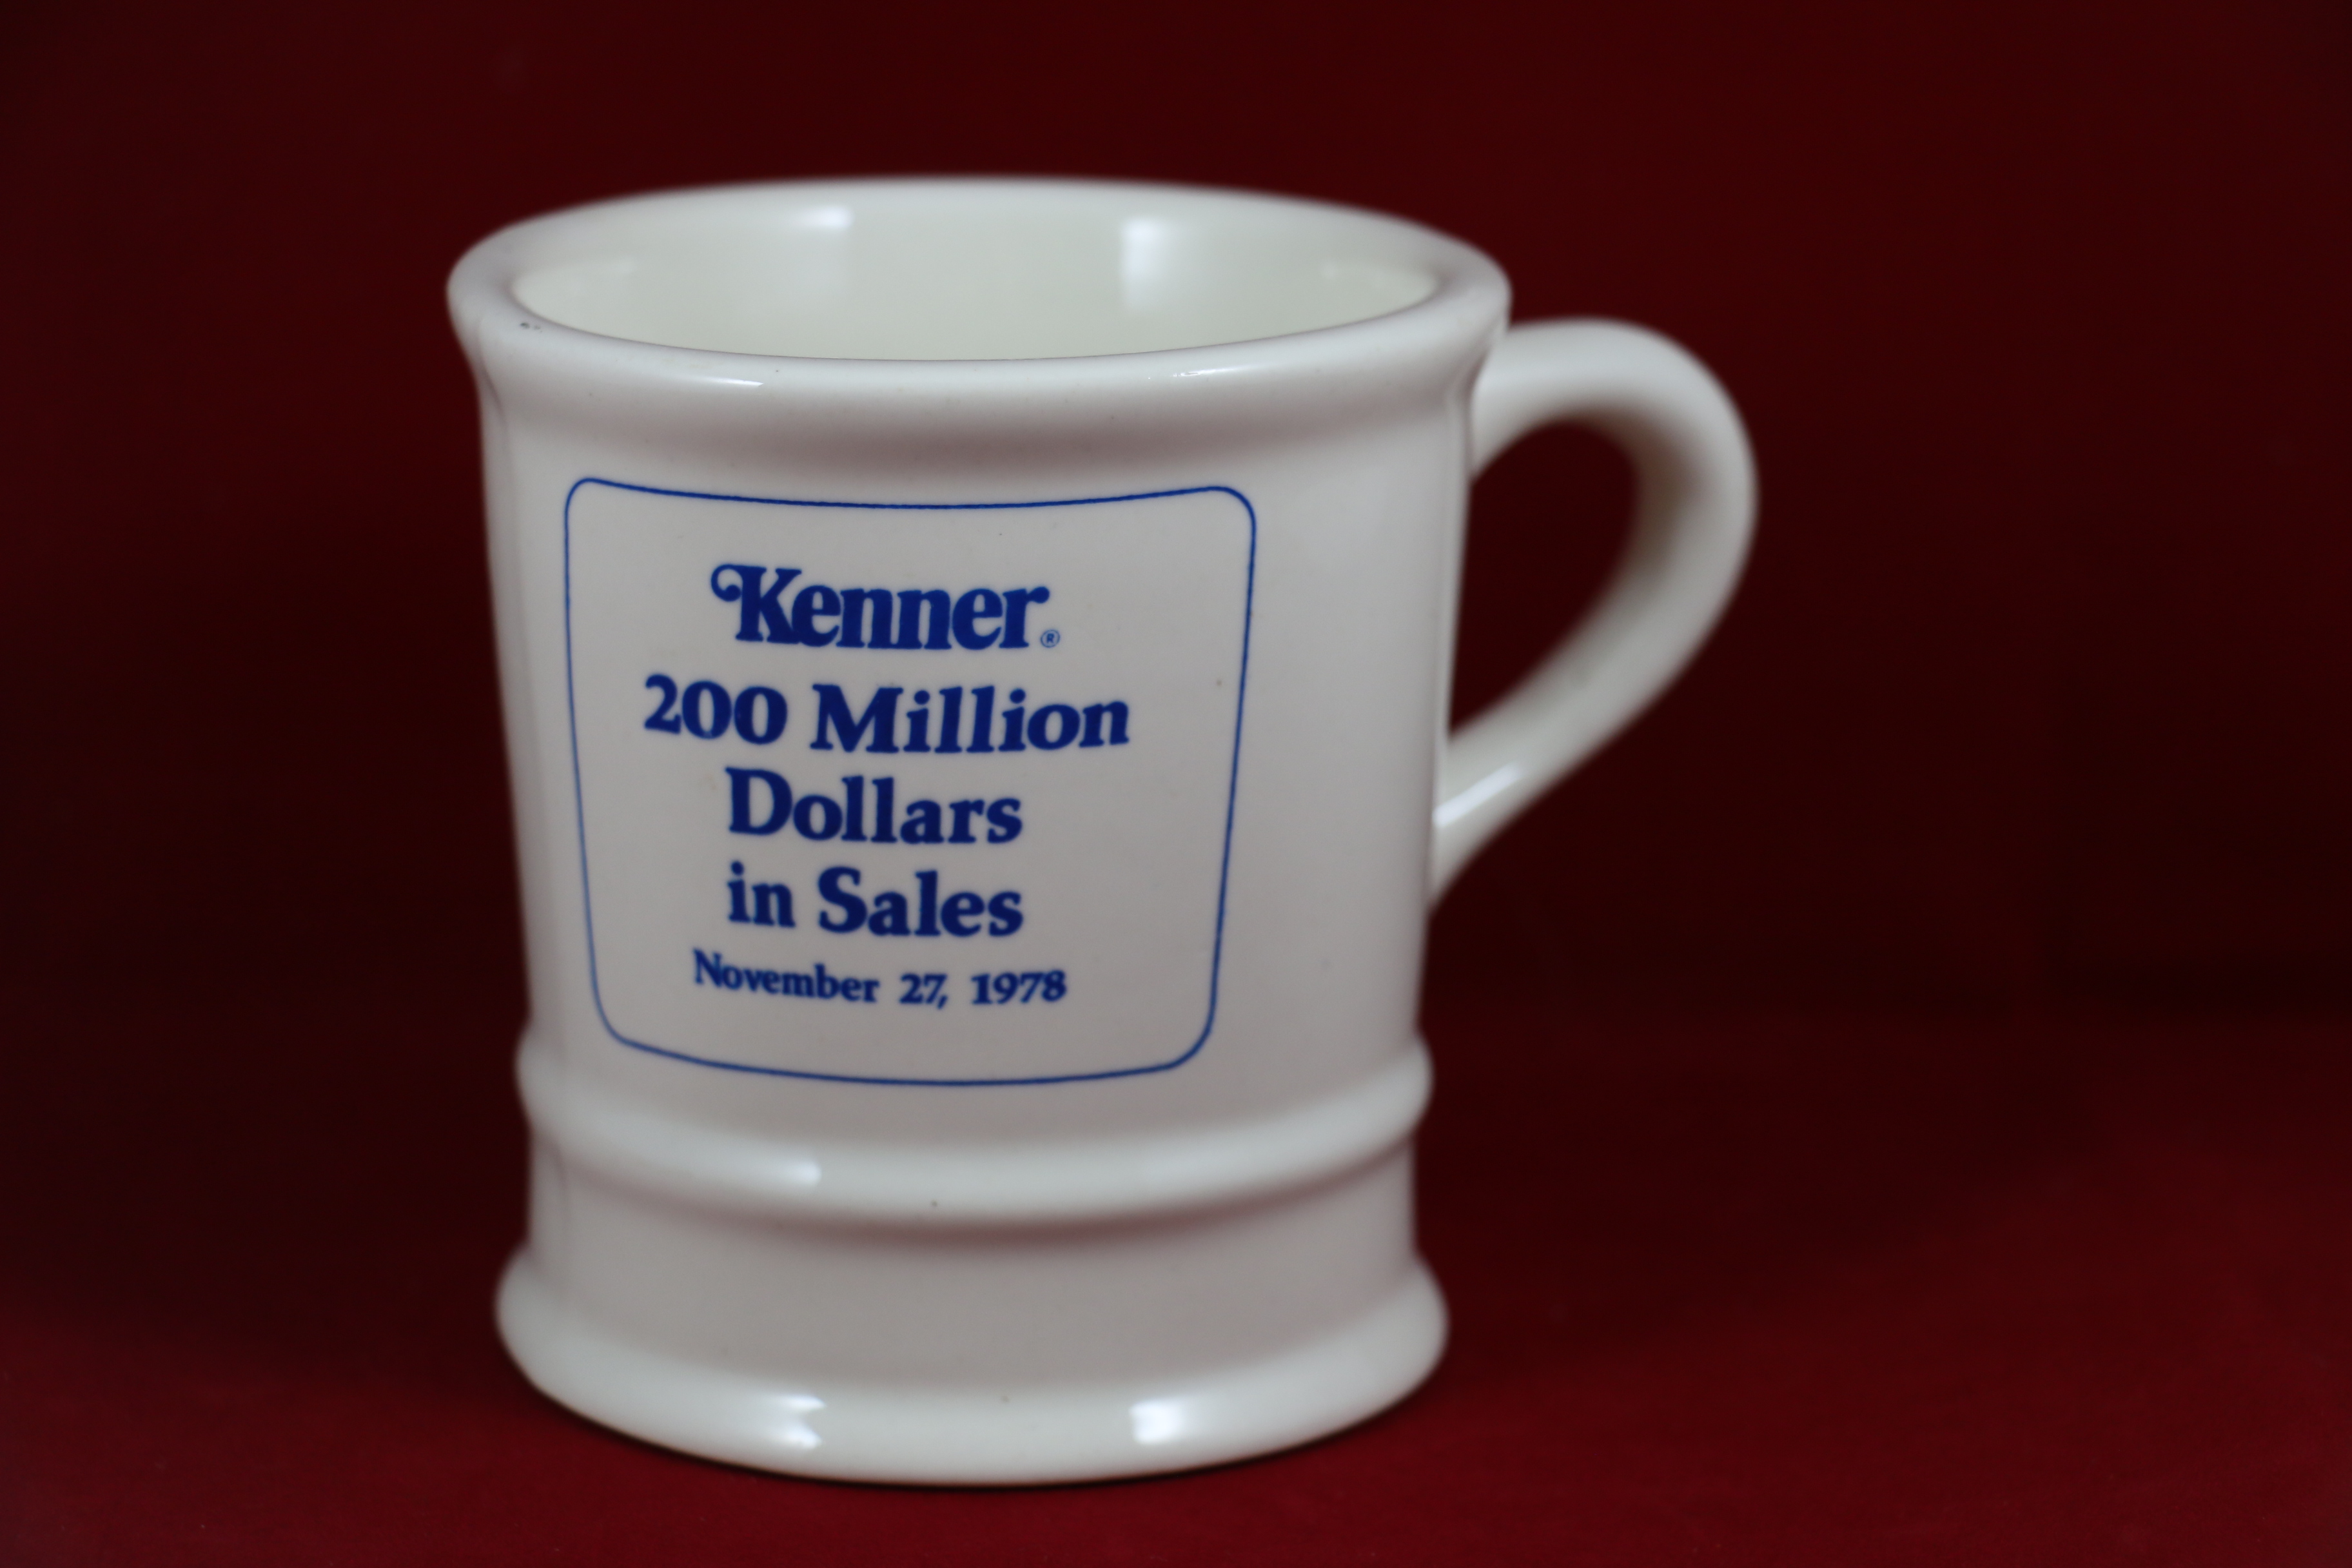 Kenner $200 Million Sales Mug Given To Employees To Celebrate